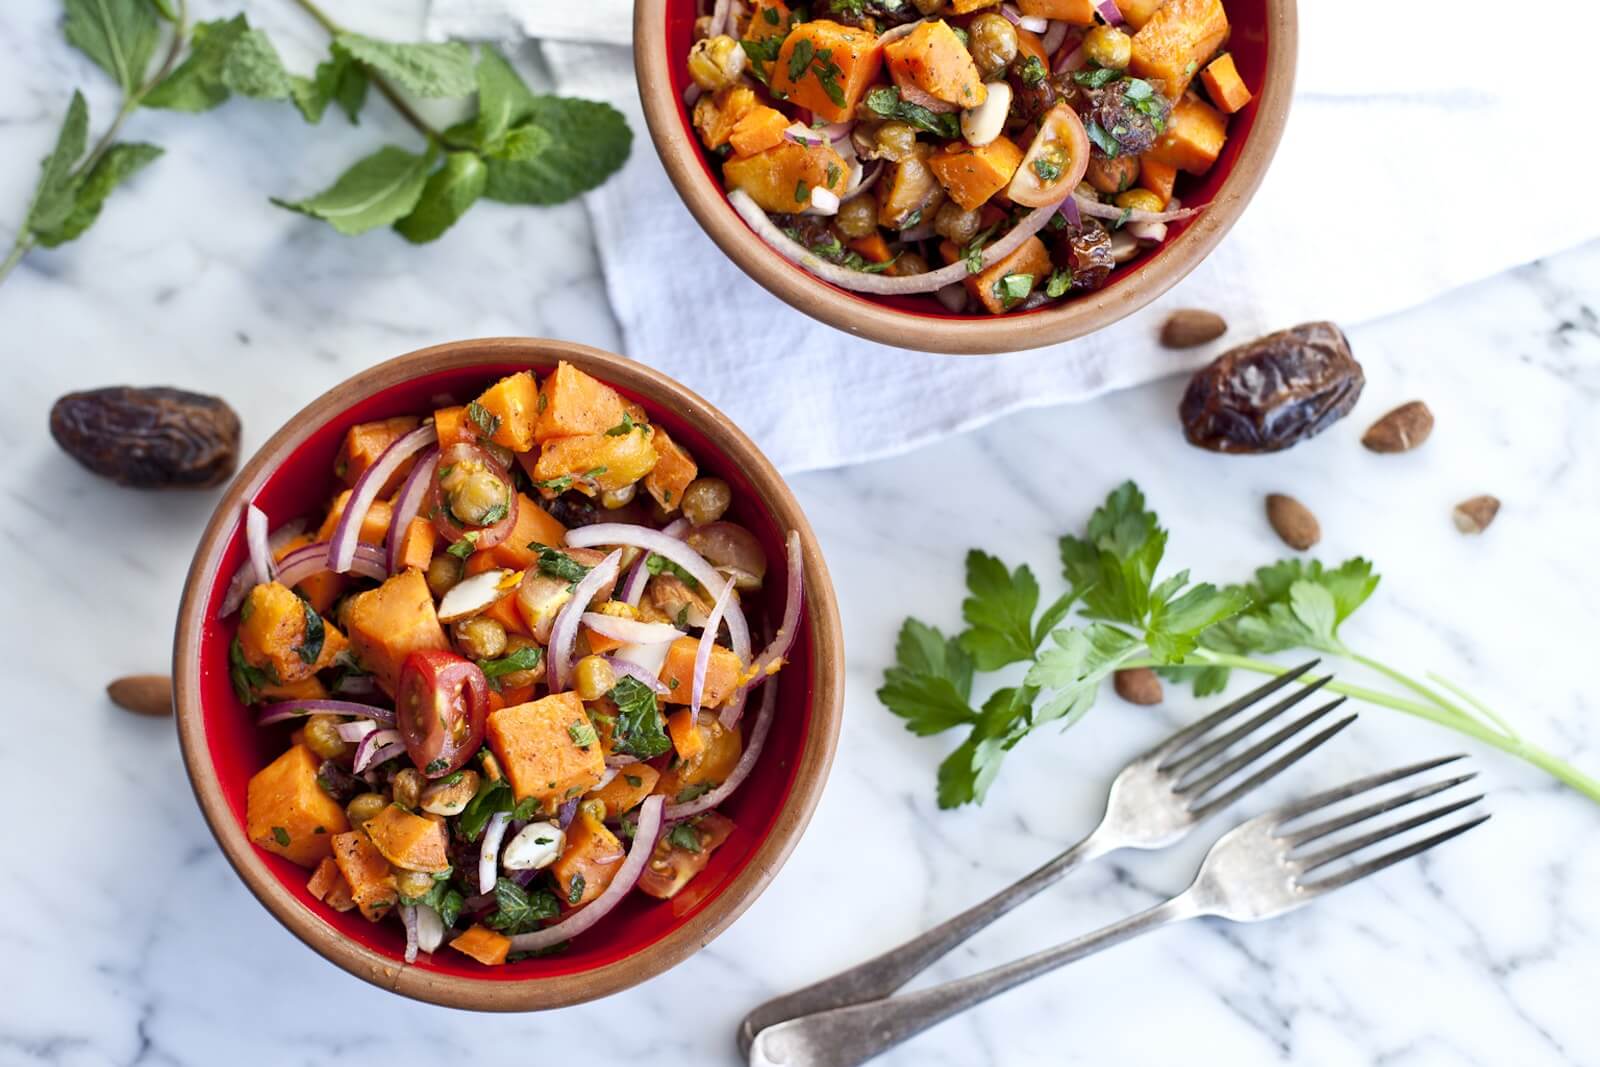 Image of Moroccan Sweet Potato and Medjool Date Salad with Cilantro-Lime Dressing